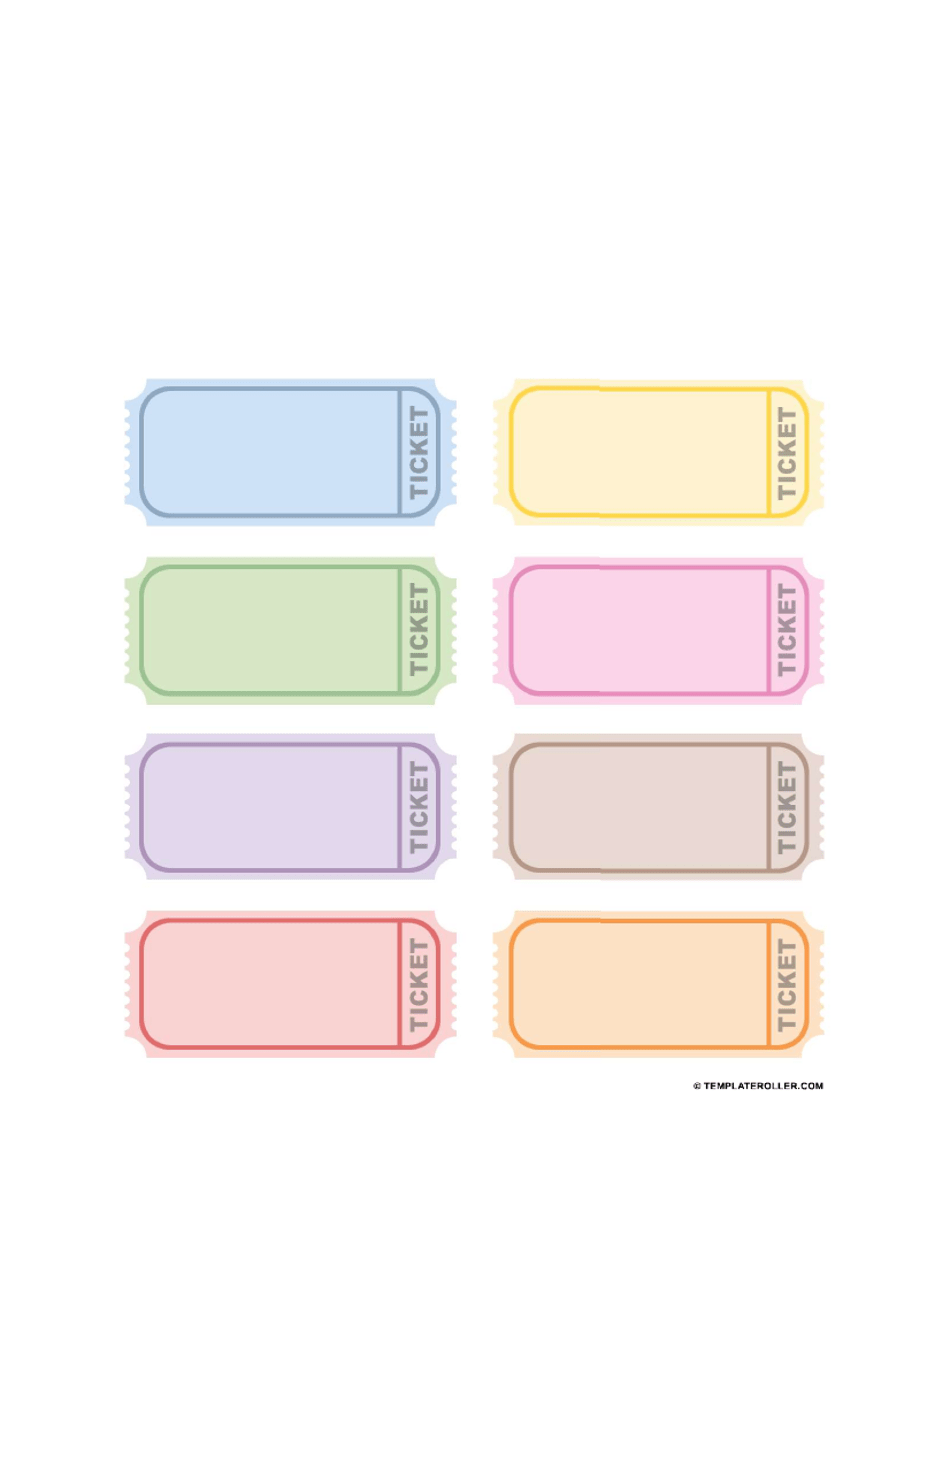 Raffle Ticket Templates - Pastels, 8 Per Page, Page 1